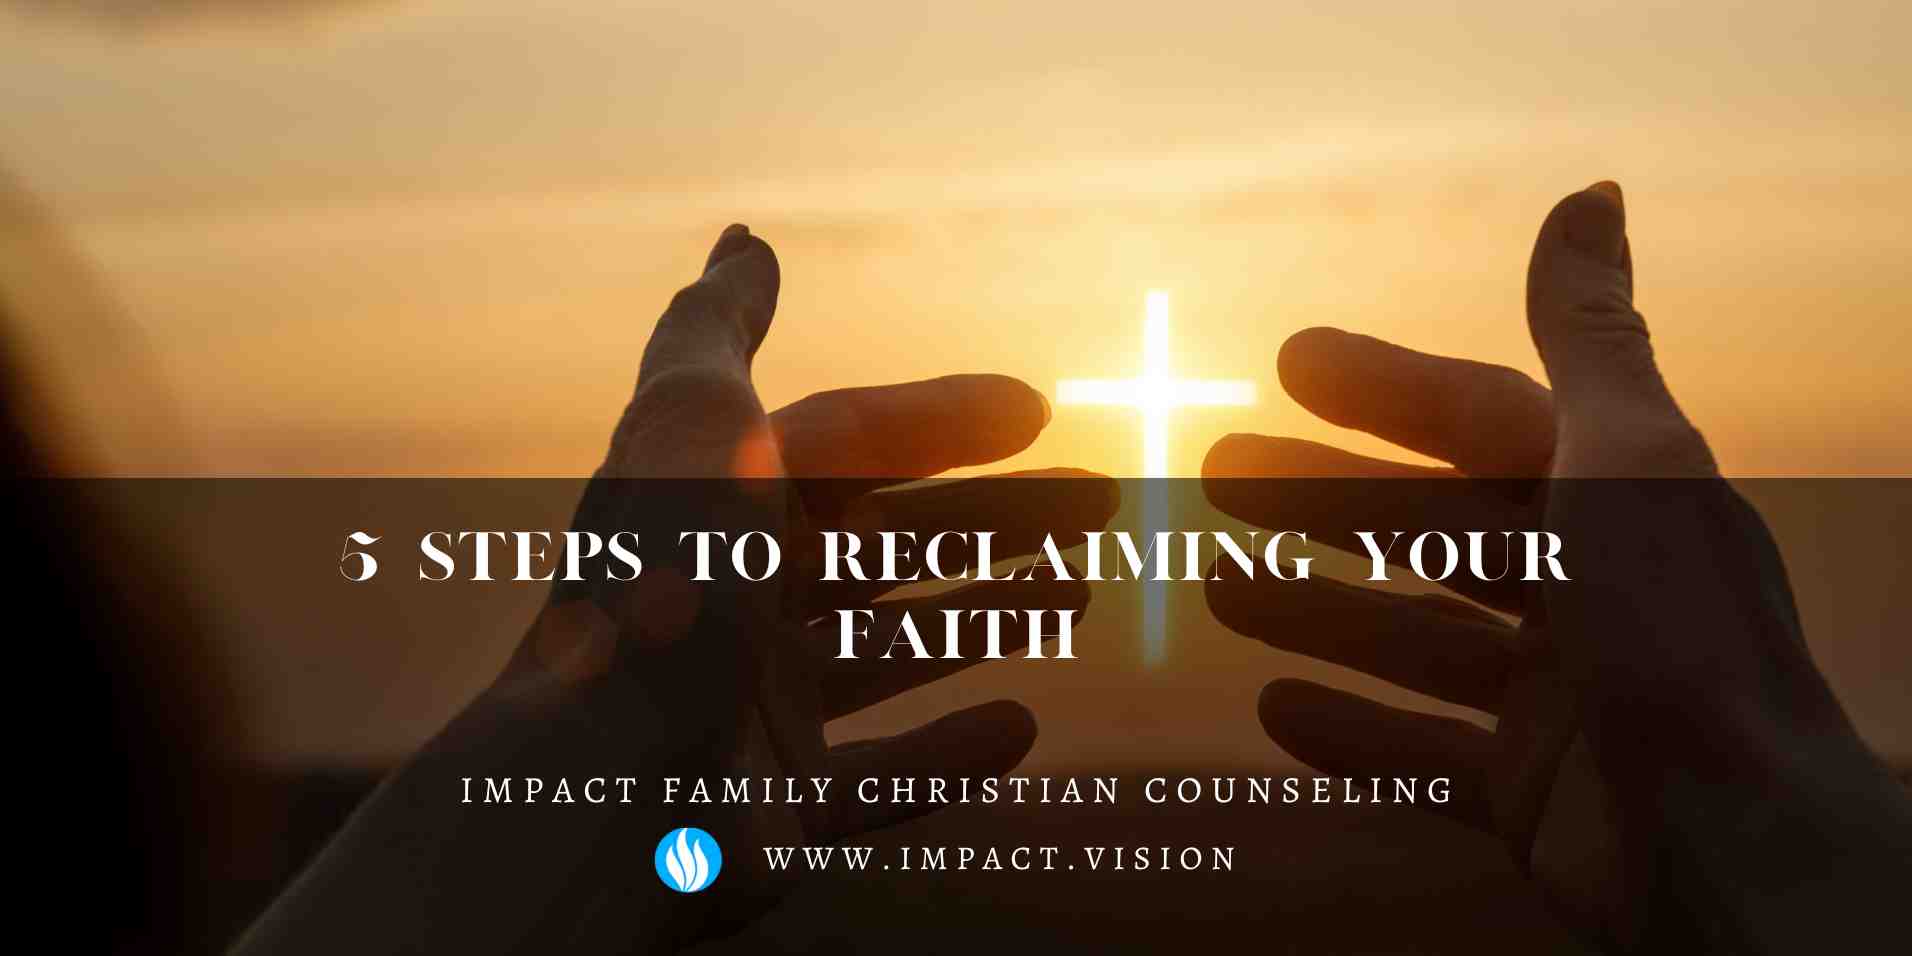 5-steps-to-reclaiming-your-faith